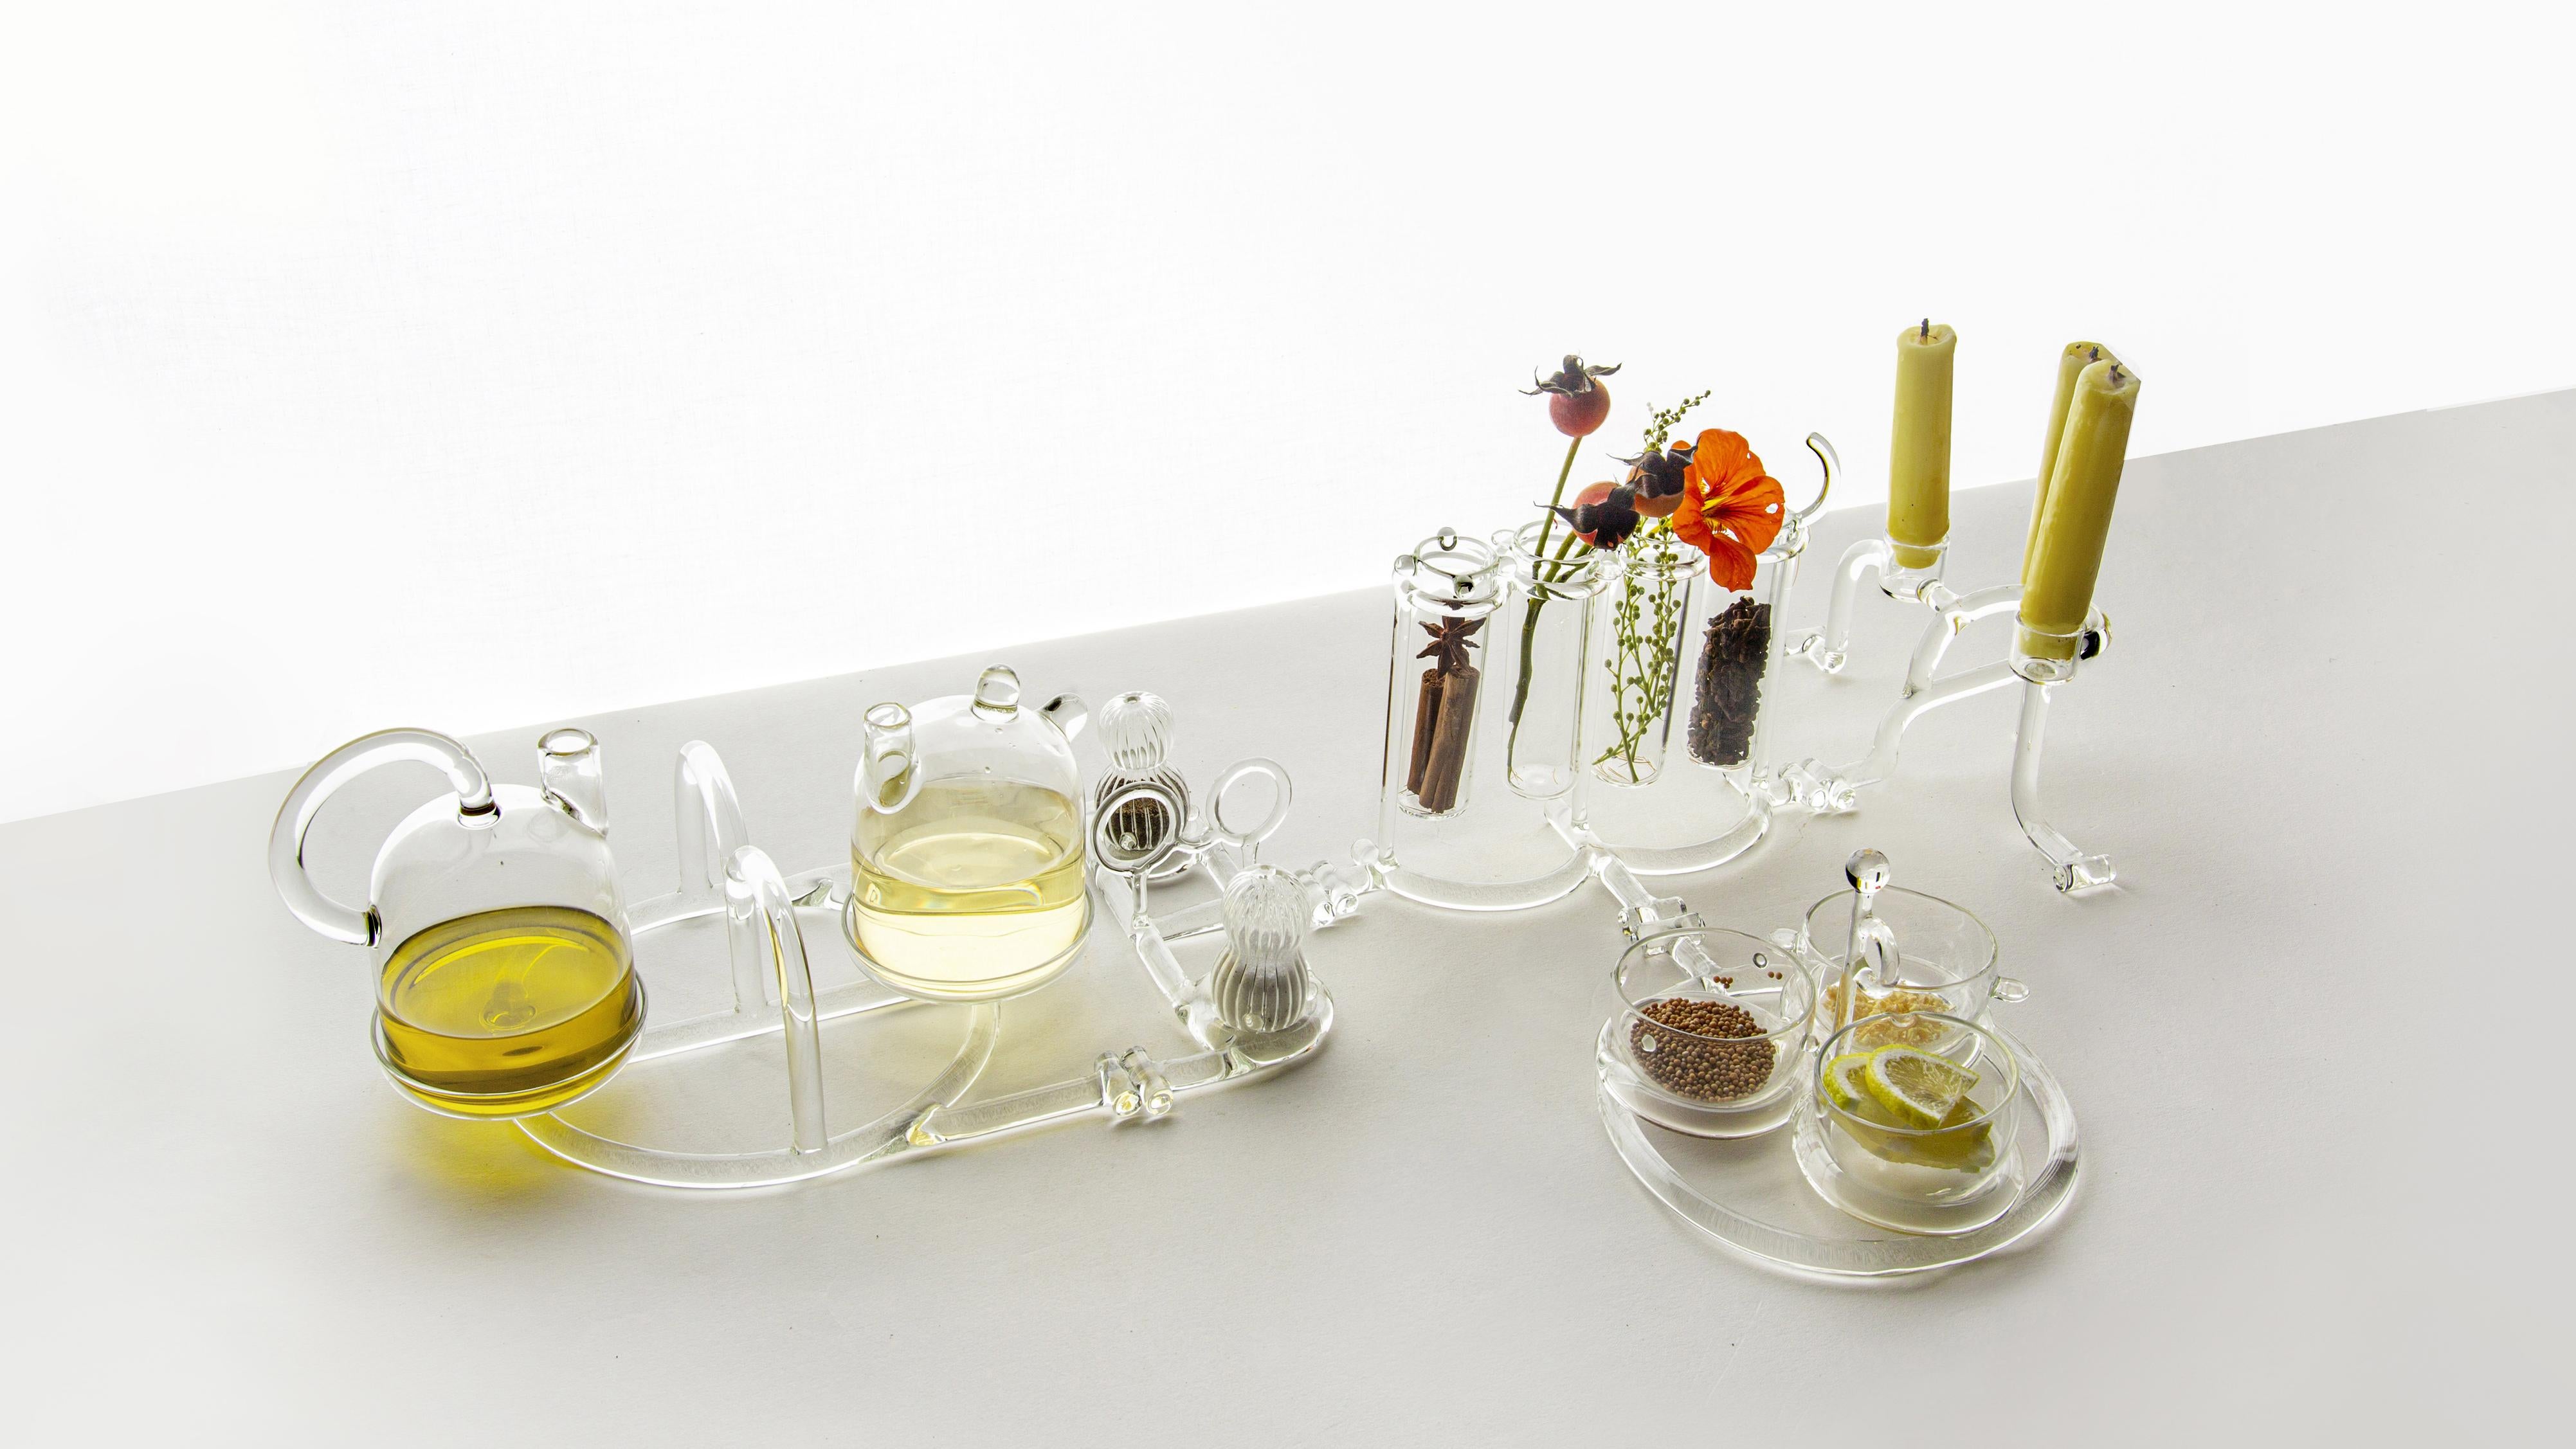 SiO2 complete tableware collection (Oil and Vinegar cruets, Salt e pepper, Candlestick, Sauce boat and Flower/Spice Pot)

The set consists of five pieces: salt & pepper, oil & vinegar, gravy boats, vases and
candleholders which can be positioned